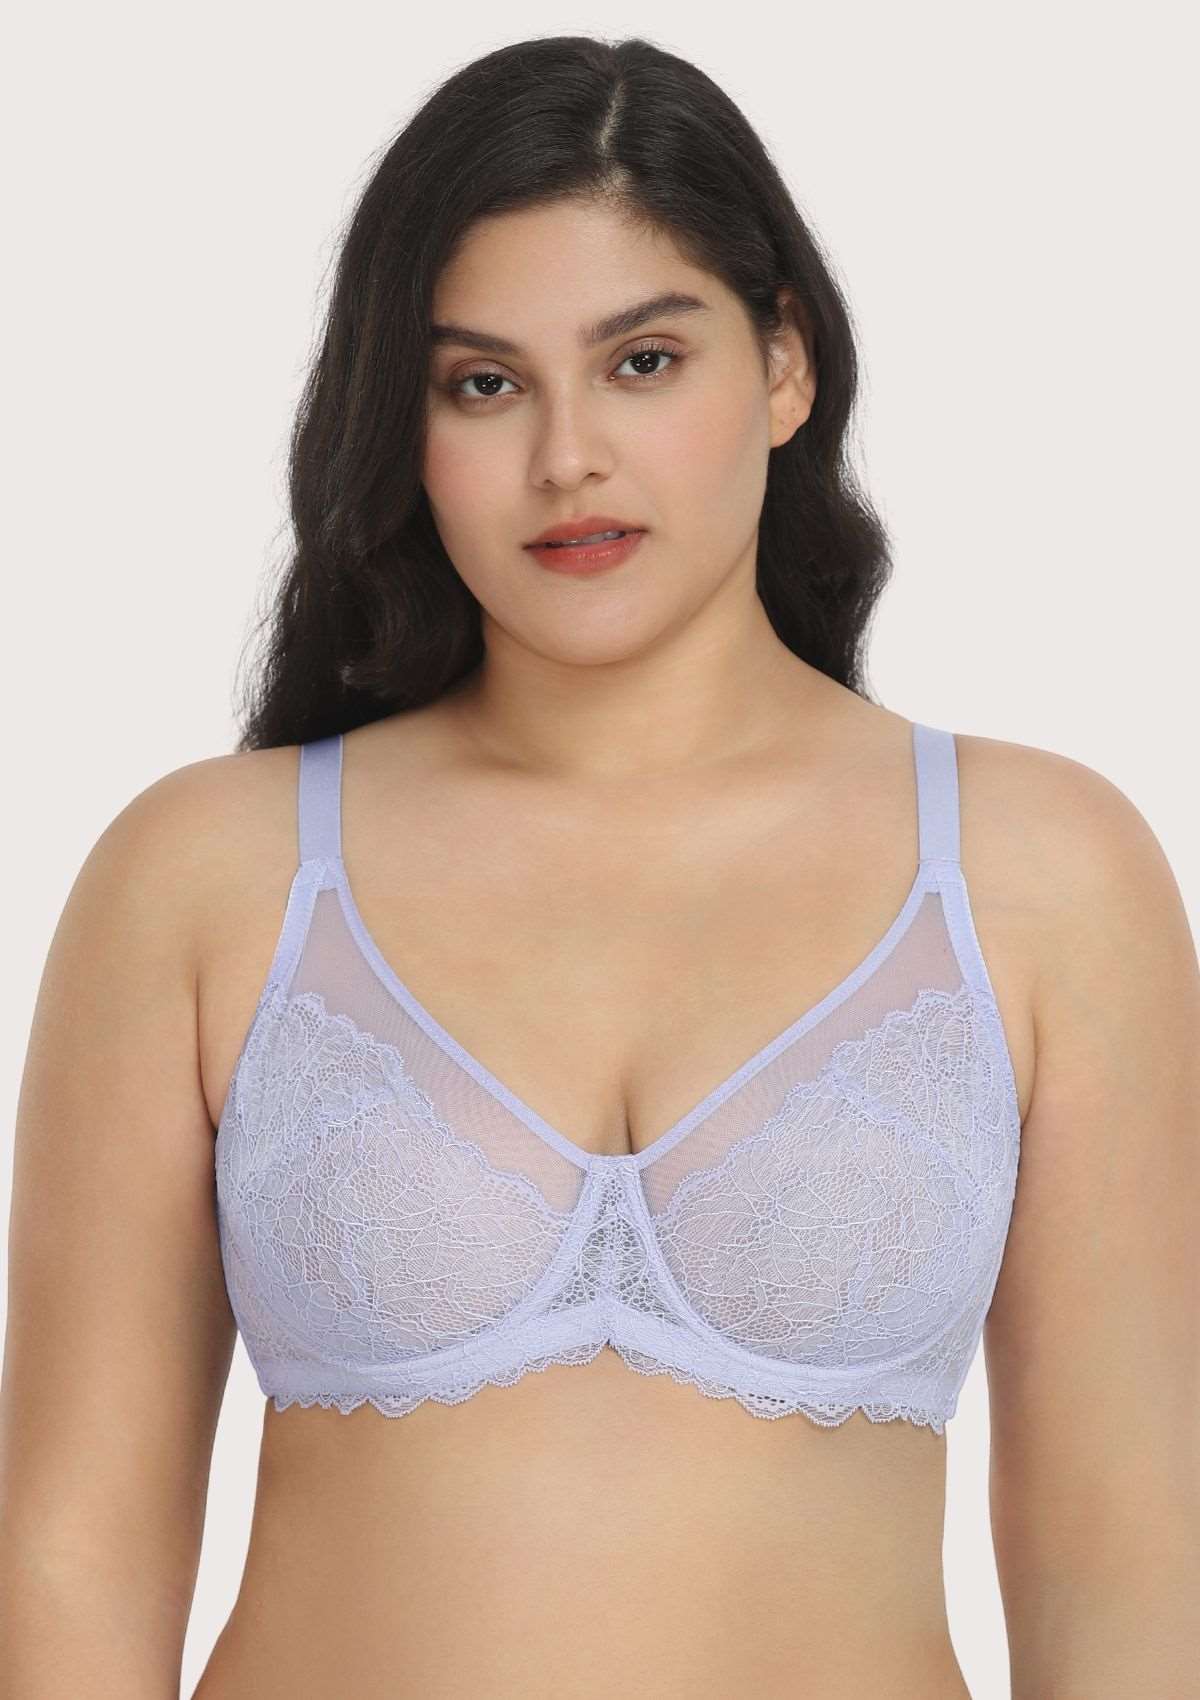 HSIA Wisteria Bra For Lift And Support - Full Coverage Minimizer Bra - Light Pink / 38 / DDD/F